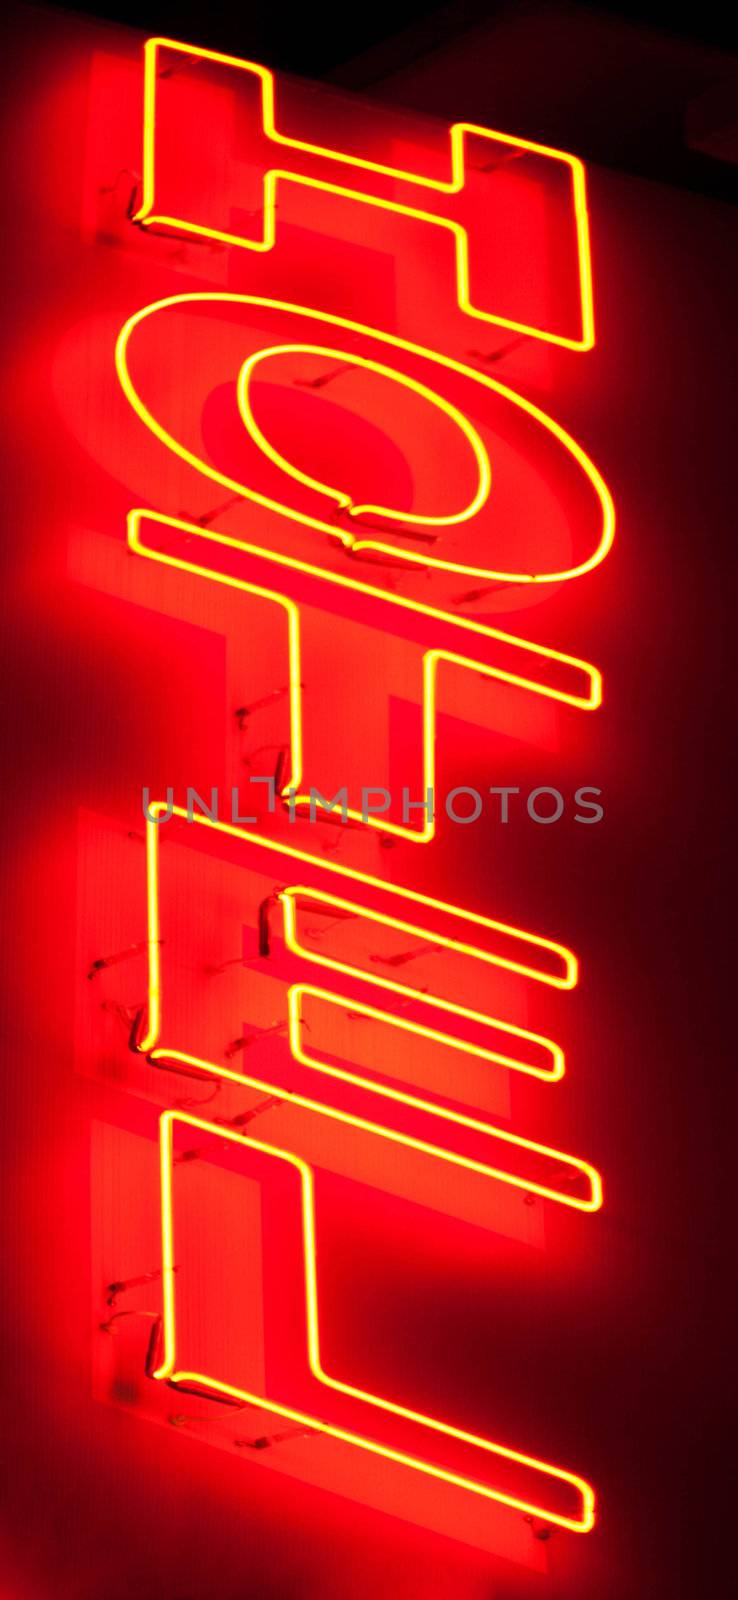 Hotel neon sign on black background